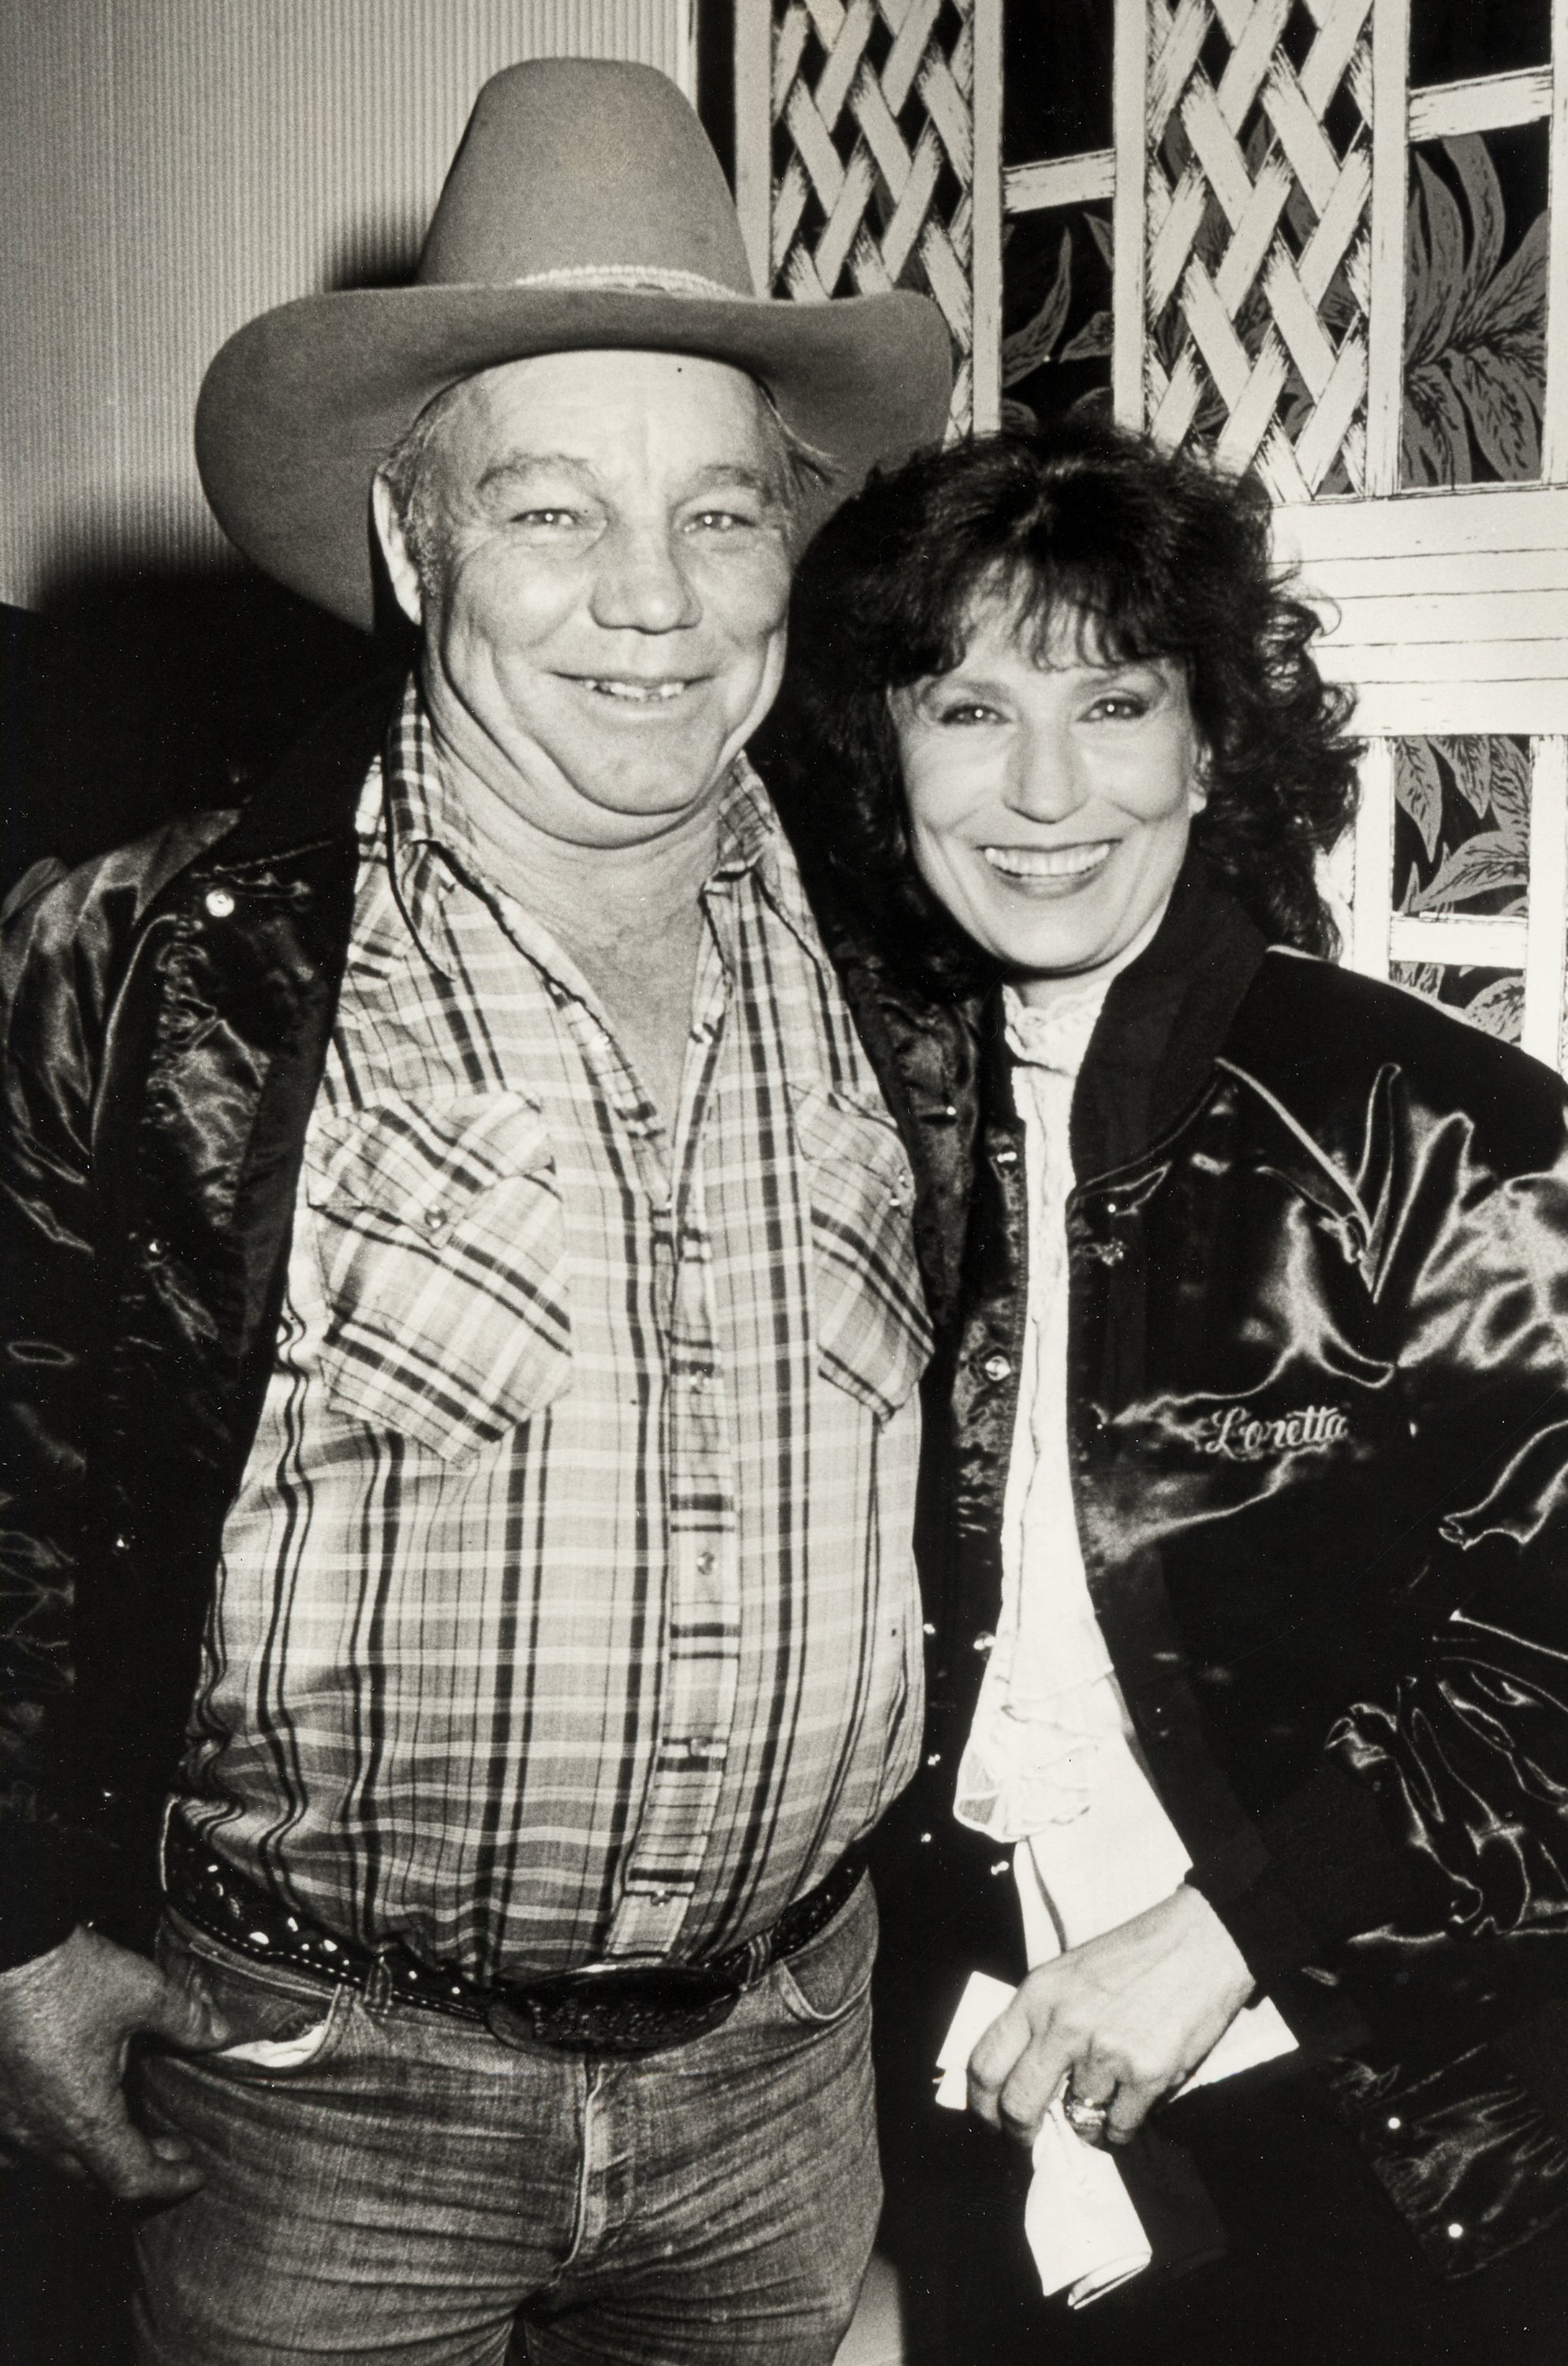 Oliver Mooney and Loretta Lynn during Party for Loretta Goes Broadway Benefit Concert at Plaza Hotel in New York City, New York, United States. October 24, 1982 | Source: Getty Images